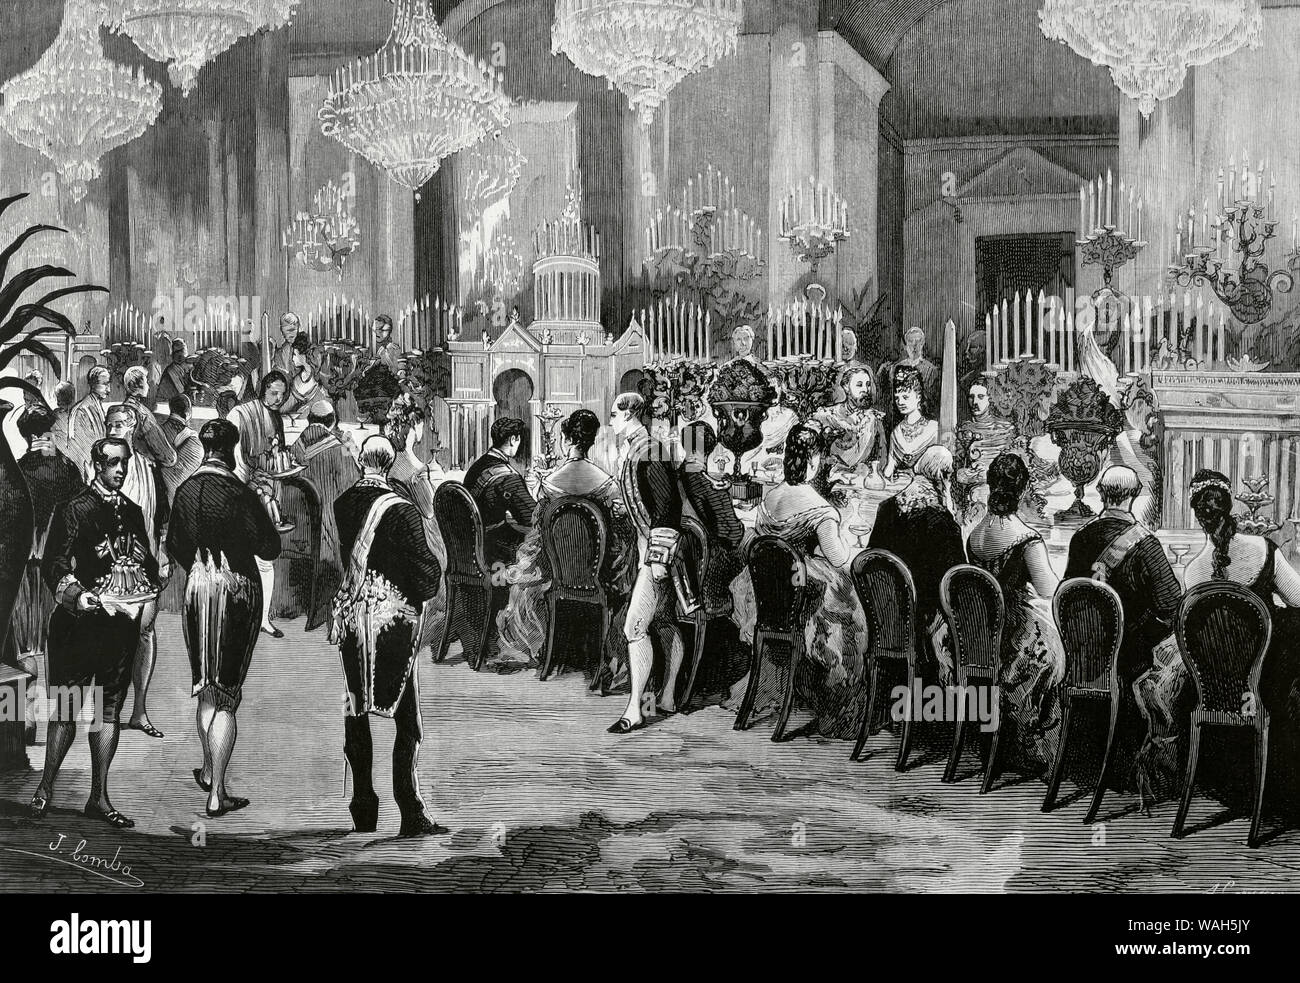 Visit of the Prince of Wales to Spain. Madrid. Royal banquet offered by King Alfonso XII (1857-1885) to the Prince Albert Edward (1841-1910), future Edward VII. It was held in the Column Hall of the Royal Palace, in the evening of April 26, 1876. Drawing by Juan Comba (1852-1924). Engraving by Arturo Carretero (1852-1903). La Ilustracion Española y Americana, Mai 8, 1876. Stock Photo